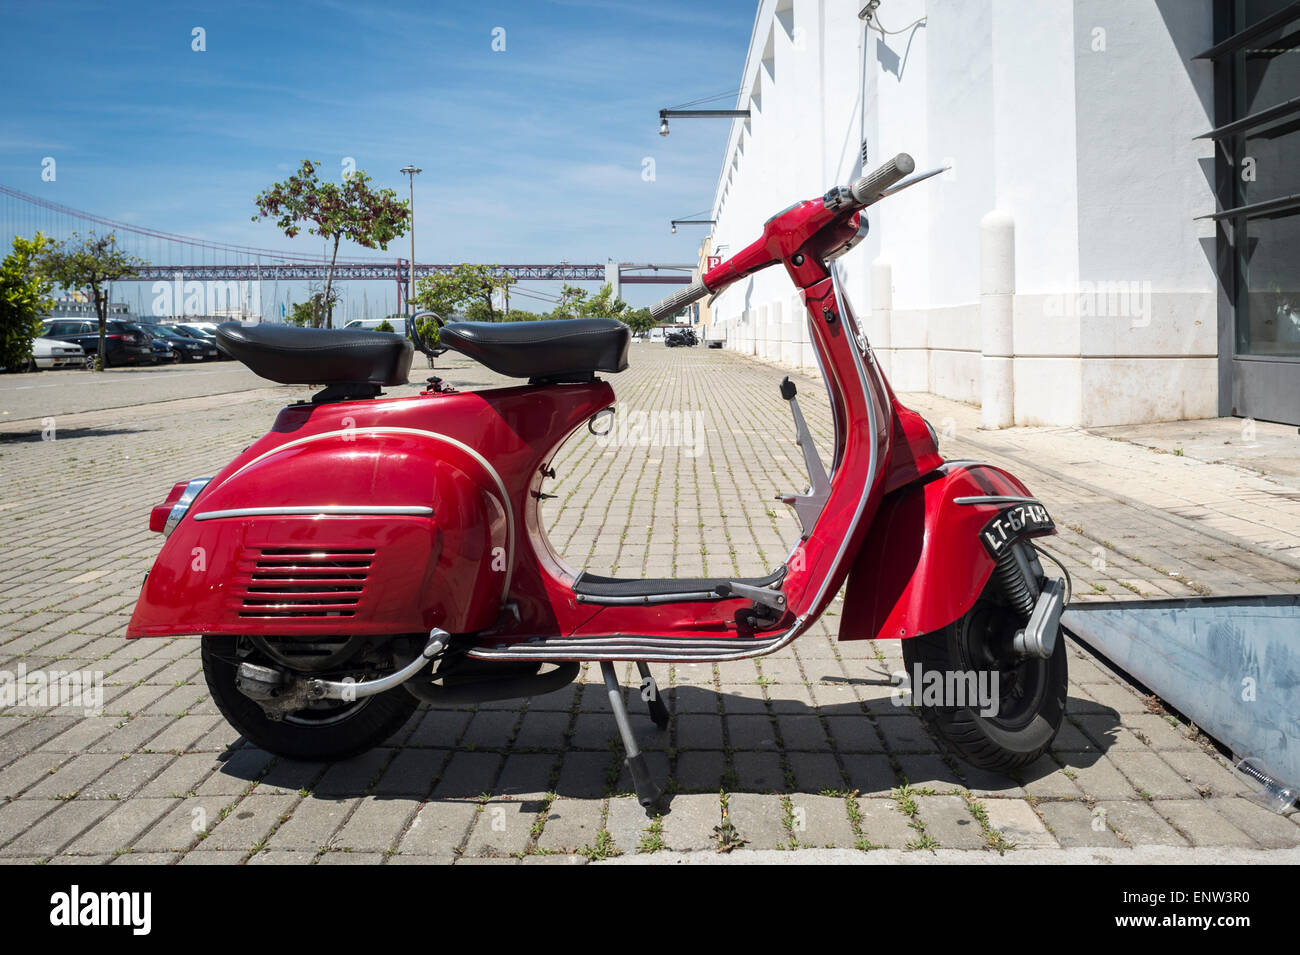 Red Vespa moped parked in Lisbon Portugal Stock Photo